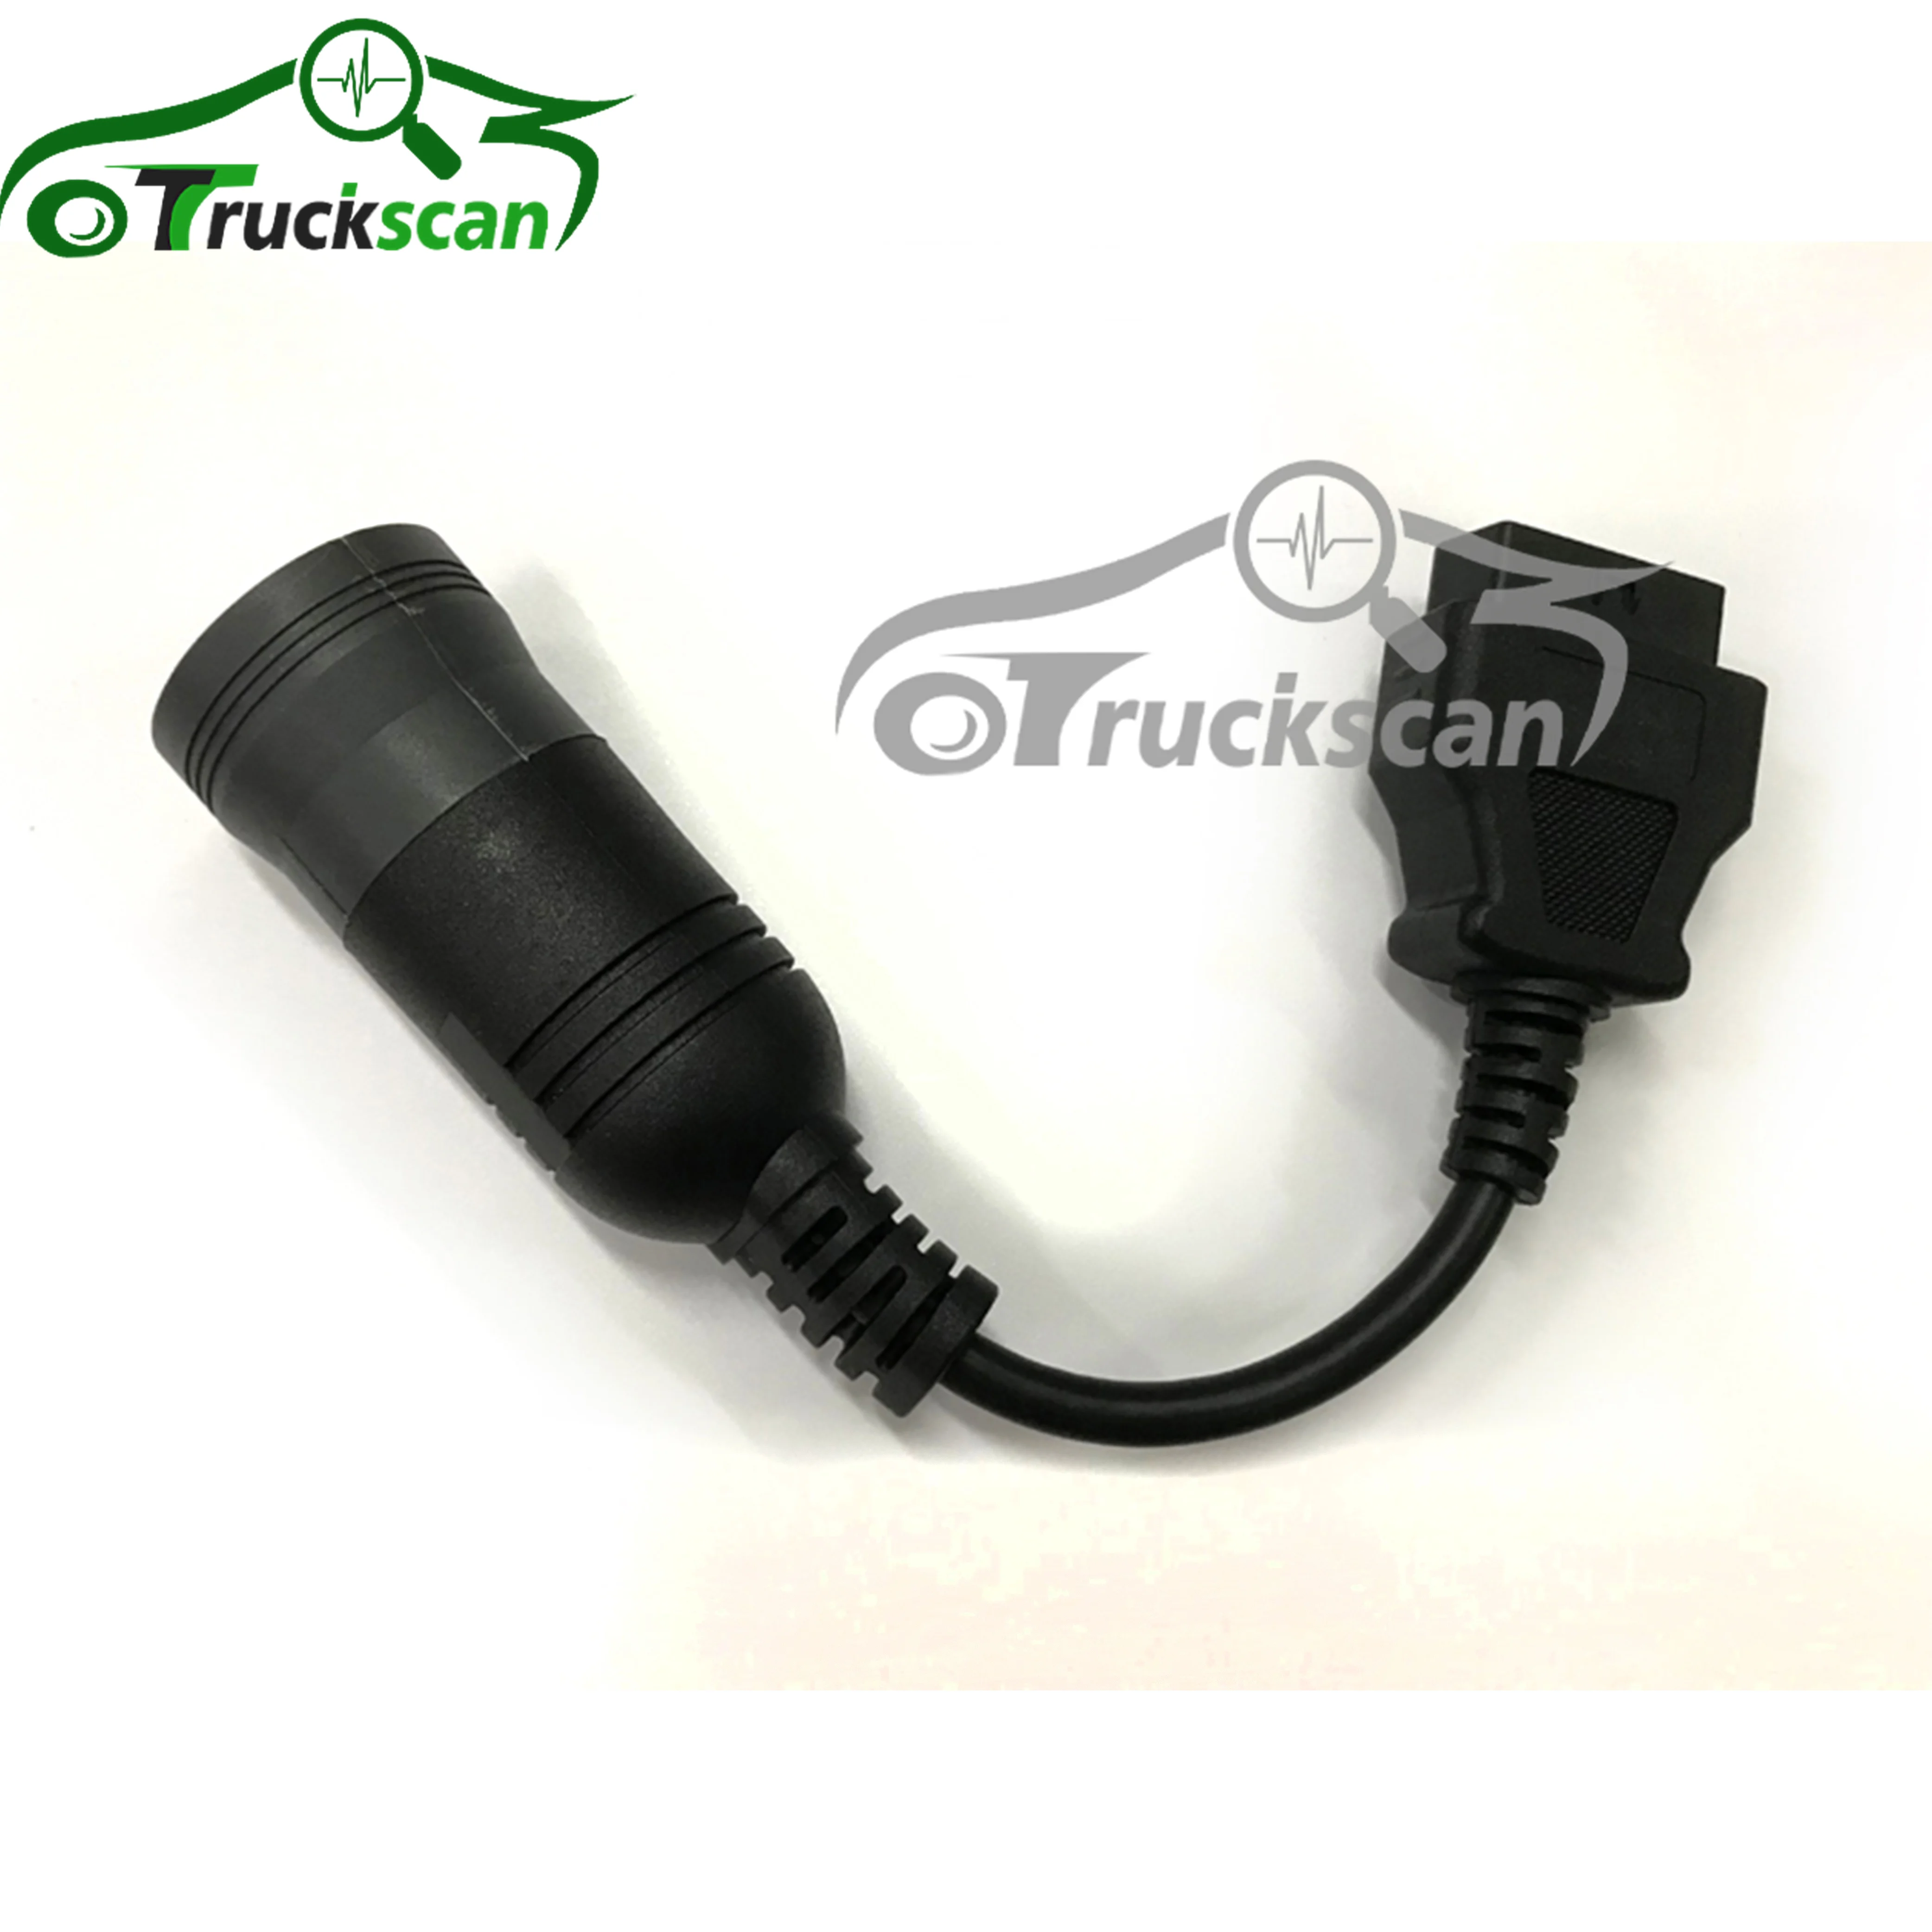 

9 Pin Truck Diagnostic Cable for 88890302 vocom interface for mack Heavy Duty Diagnostic tool North America Connect Cable